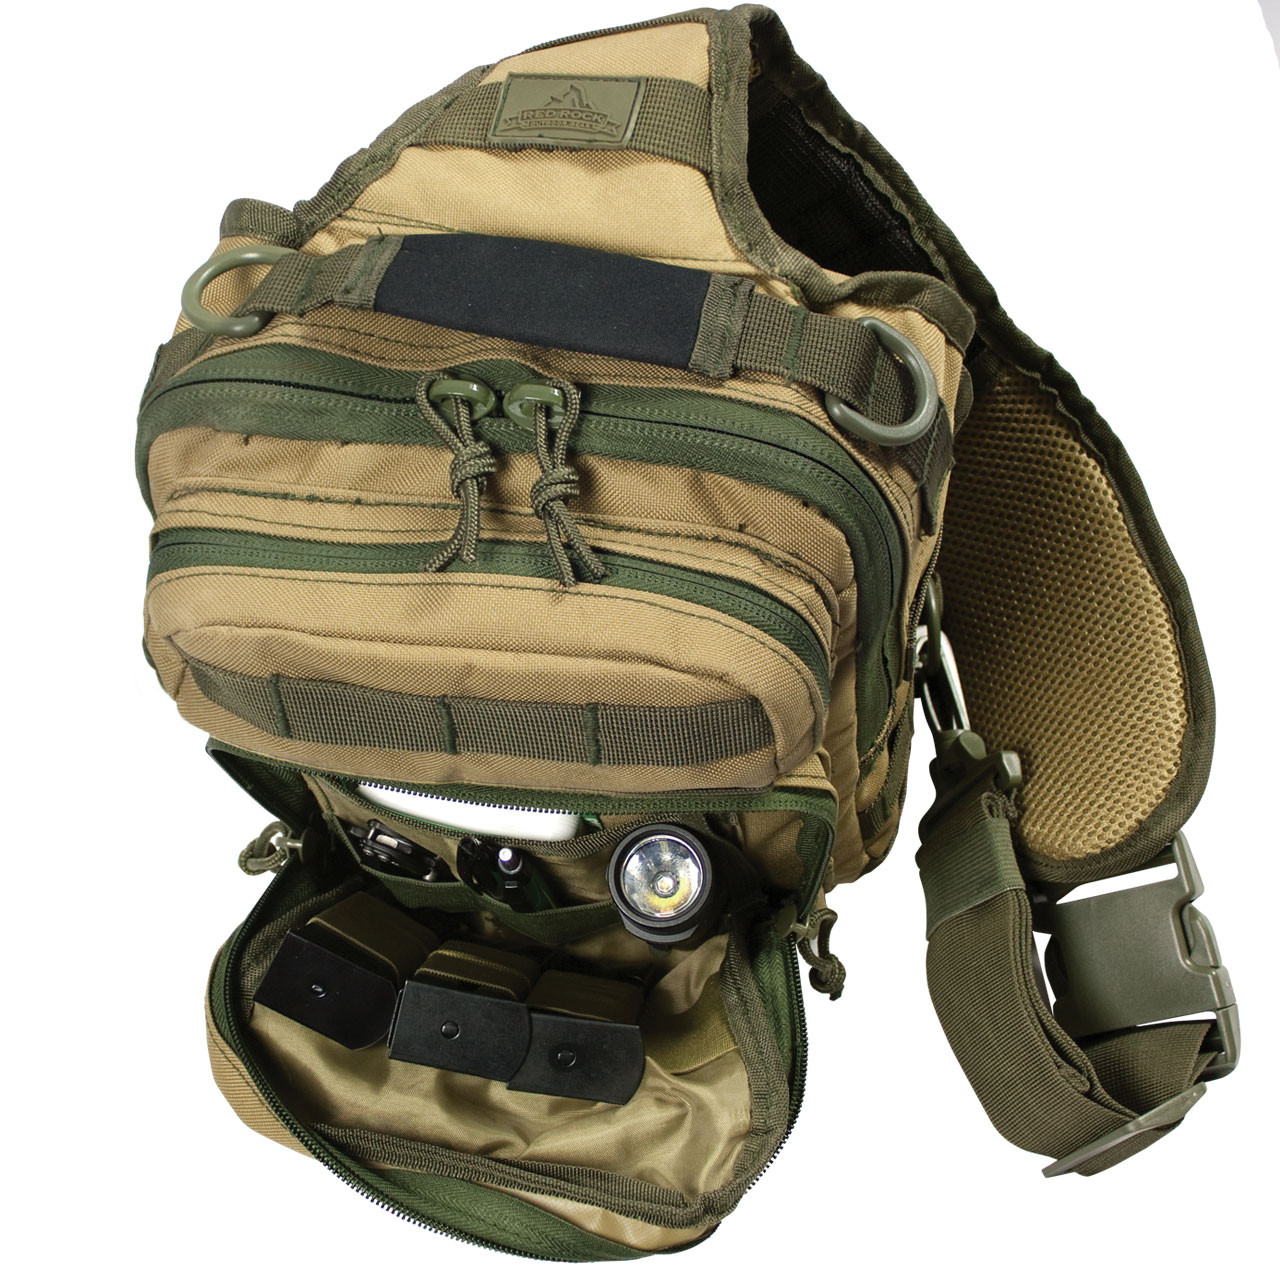 Red Rock Outdoor Gear Red Rock Large Rover Sling Pack - Clothing